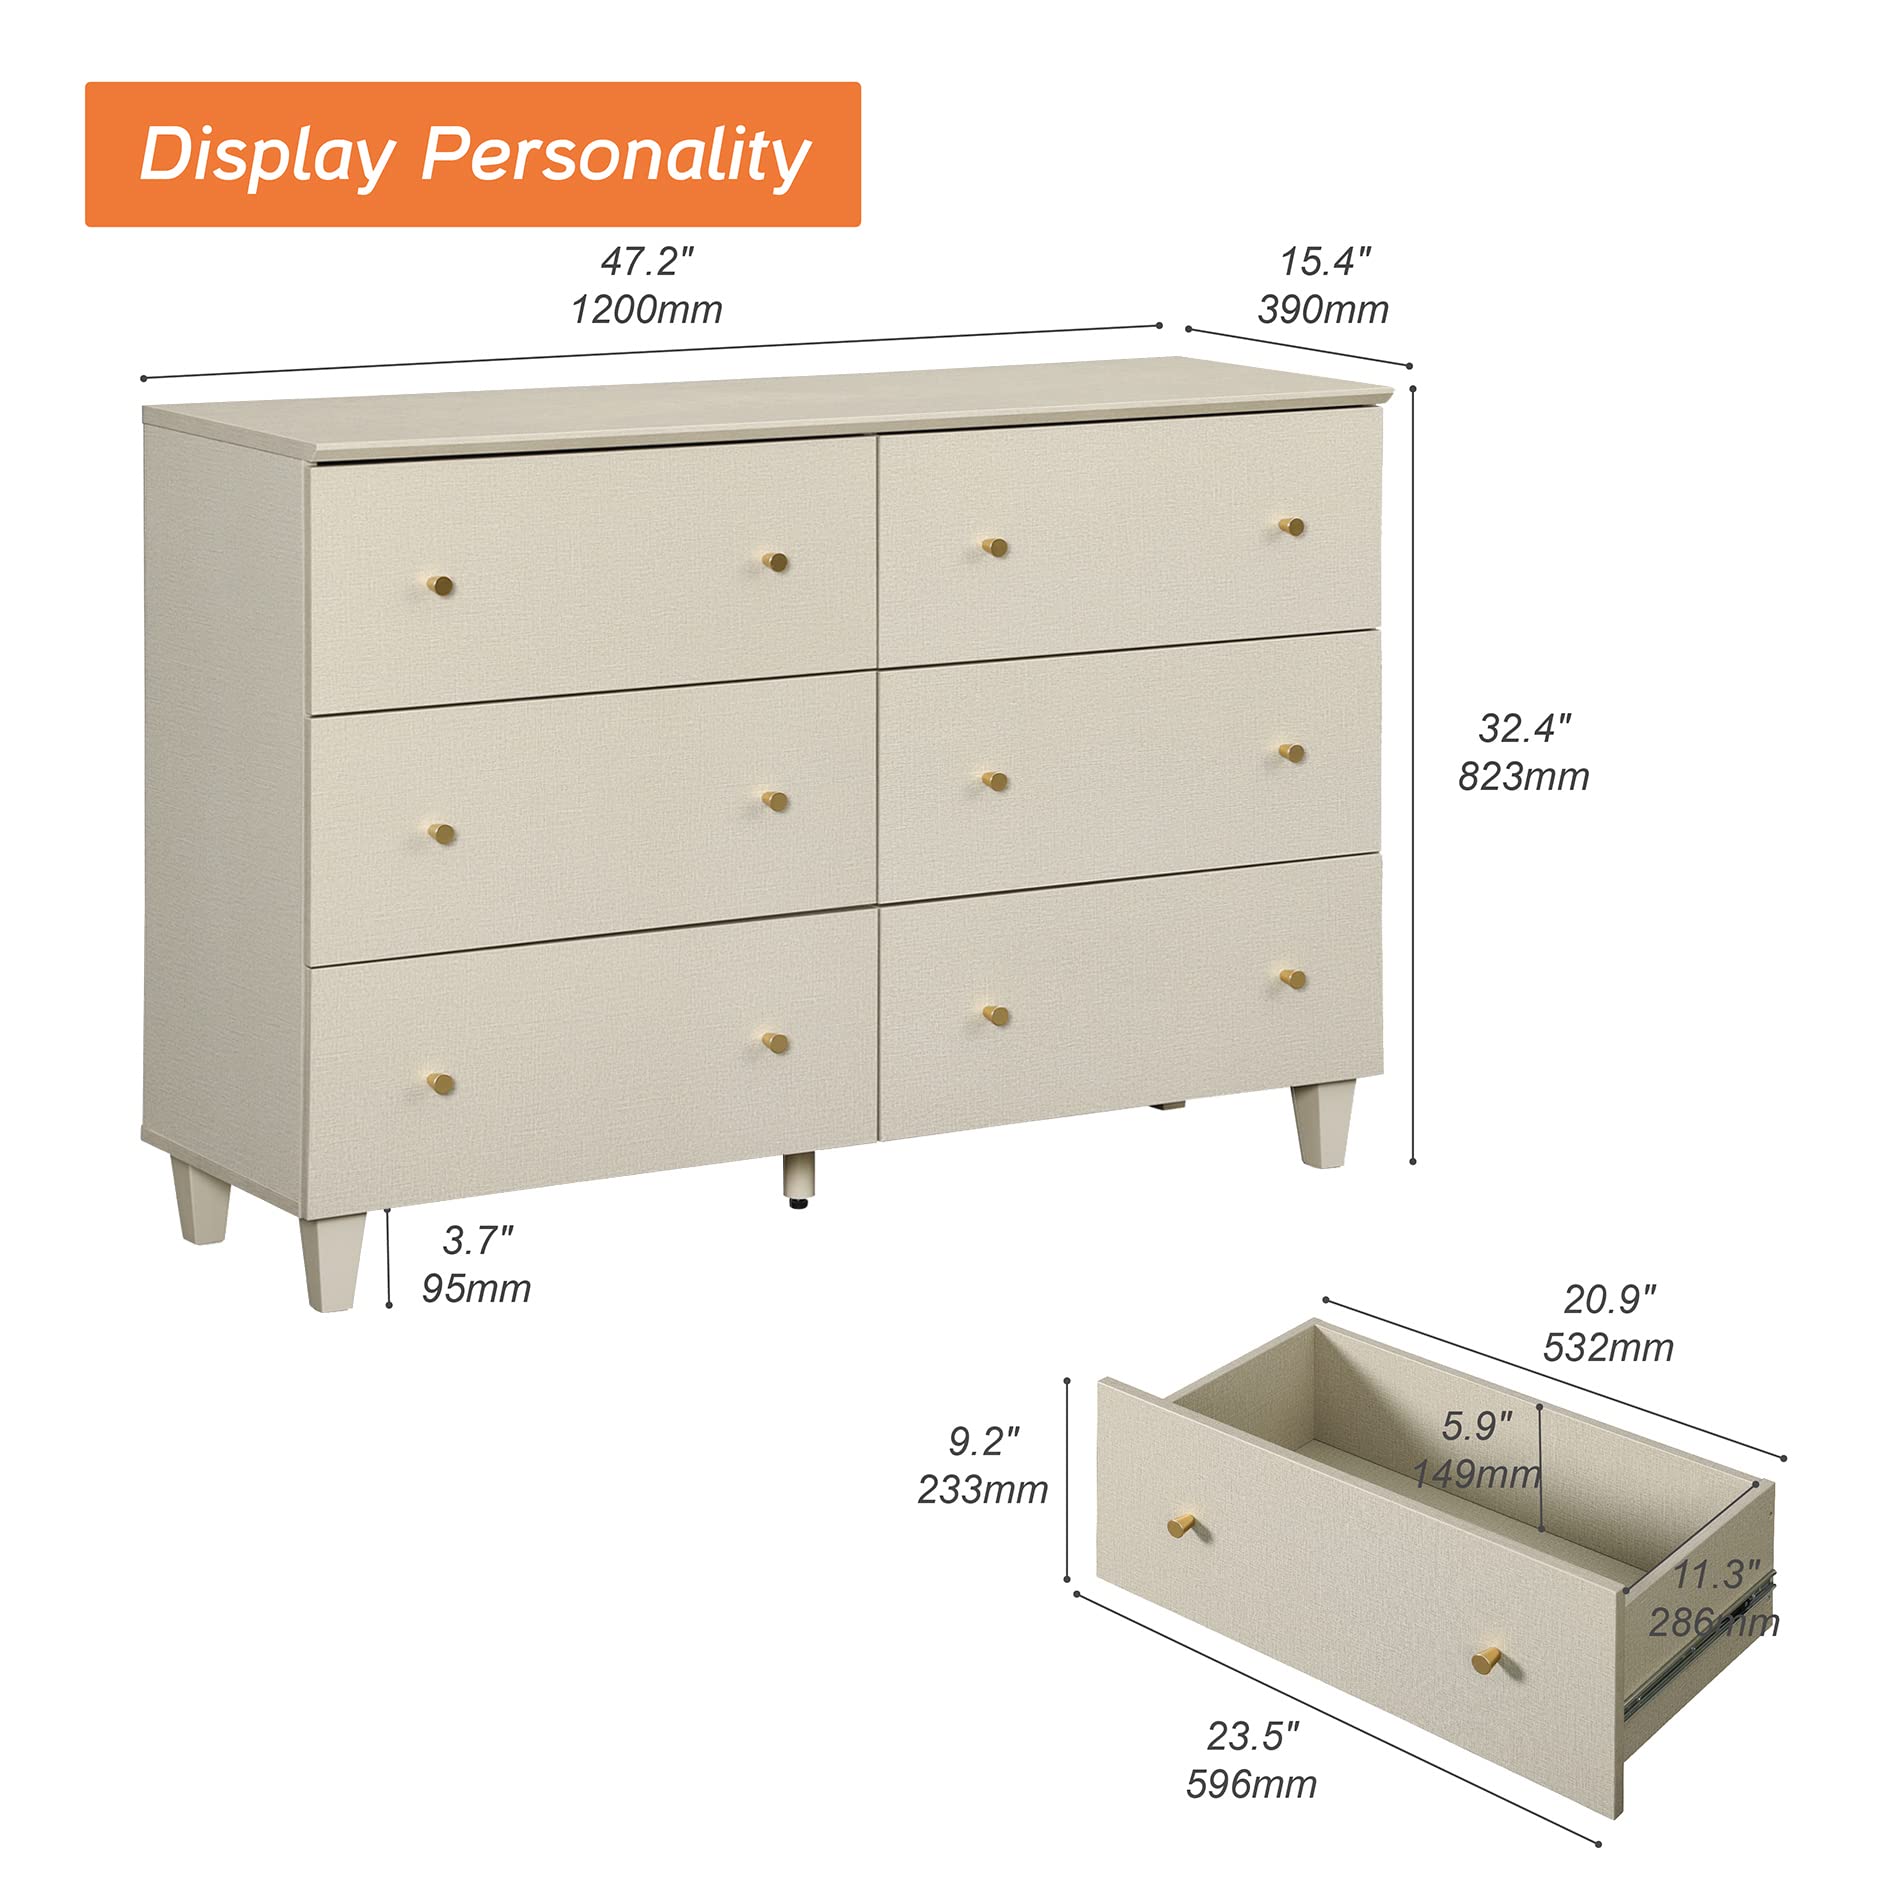 WAMPAT 6 Drawers Dresser for Bedroom, 47.2" Wide Double Dressers with Chest of Drawers, Modern Beige Wood Closet Storage Organizer with Gold Knobs & Solid Legs for Kids Baby Room, Nursery